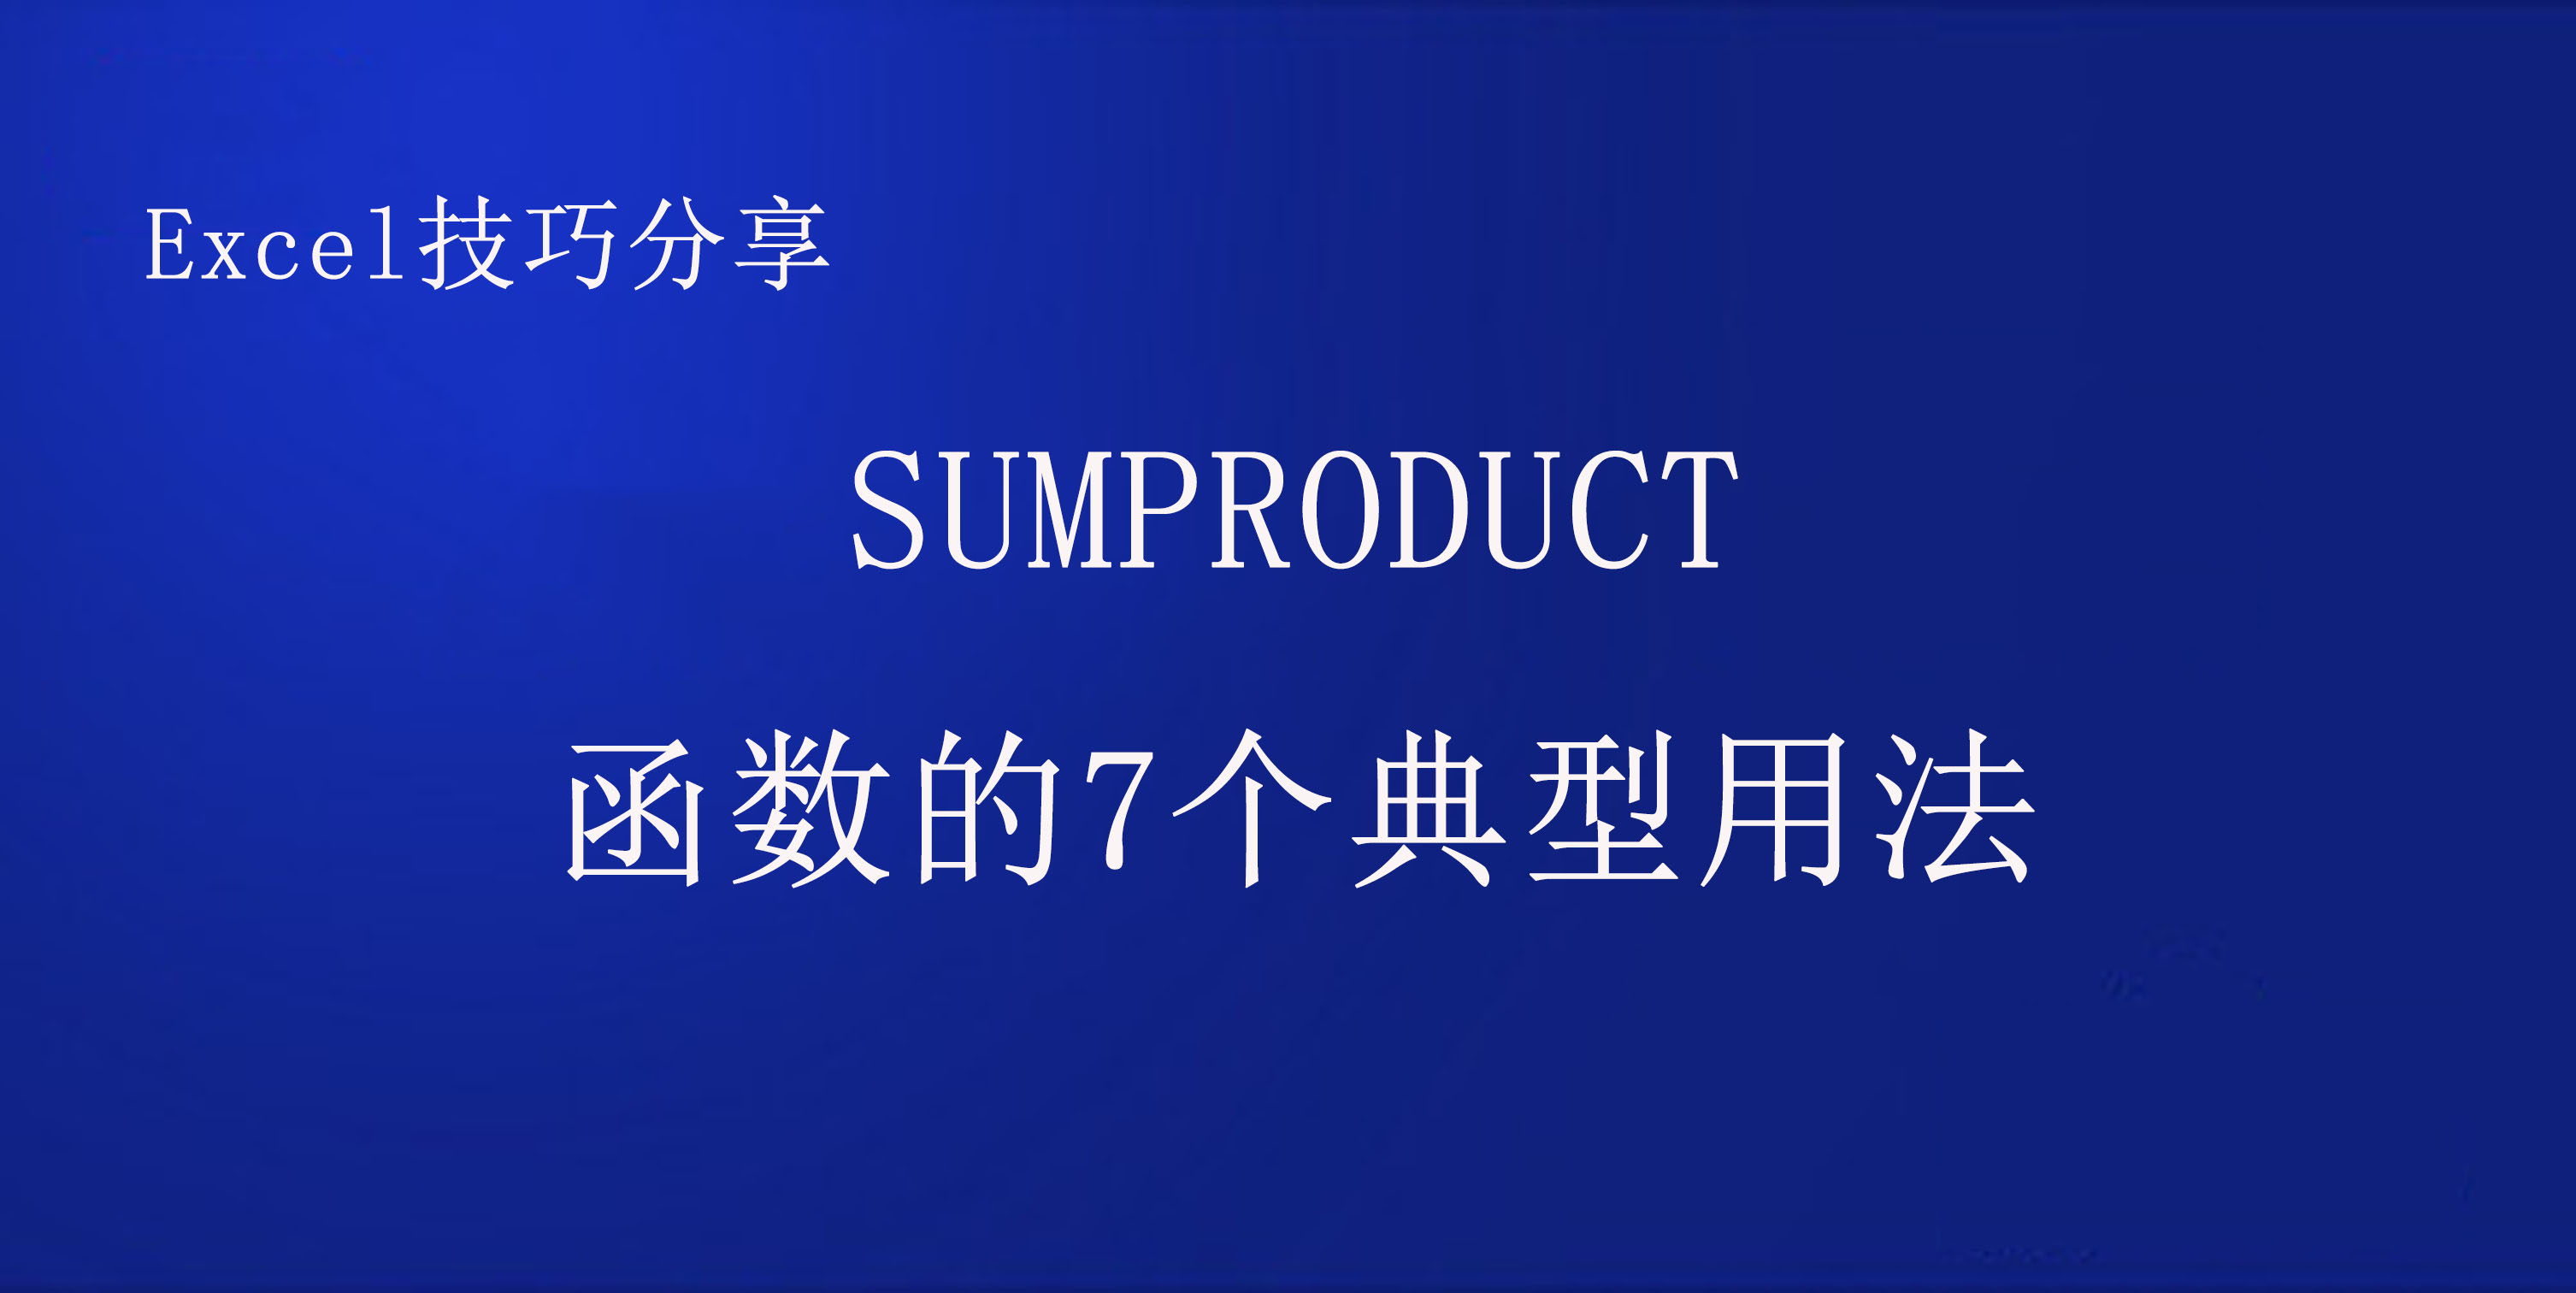 SUMPRODUCT7÷